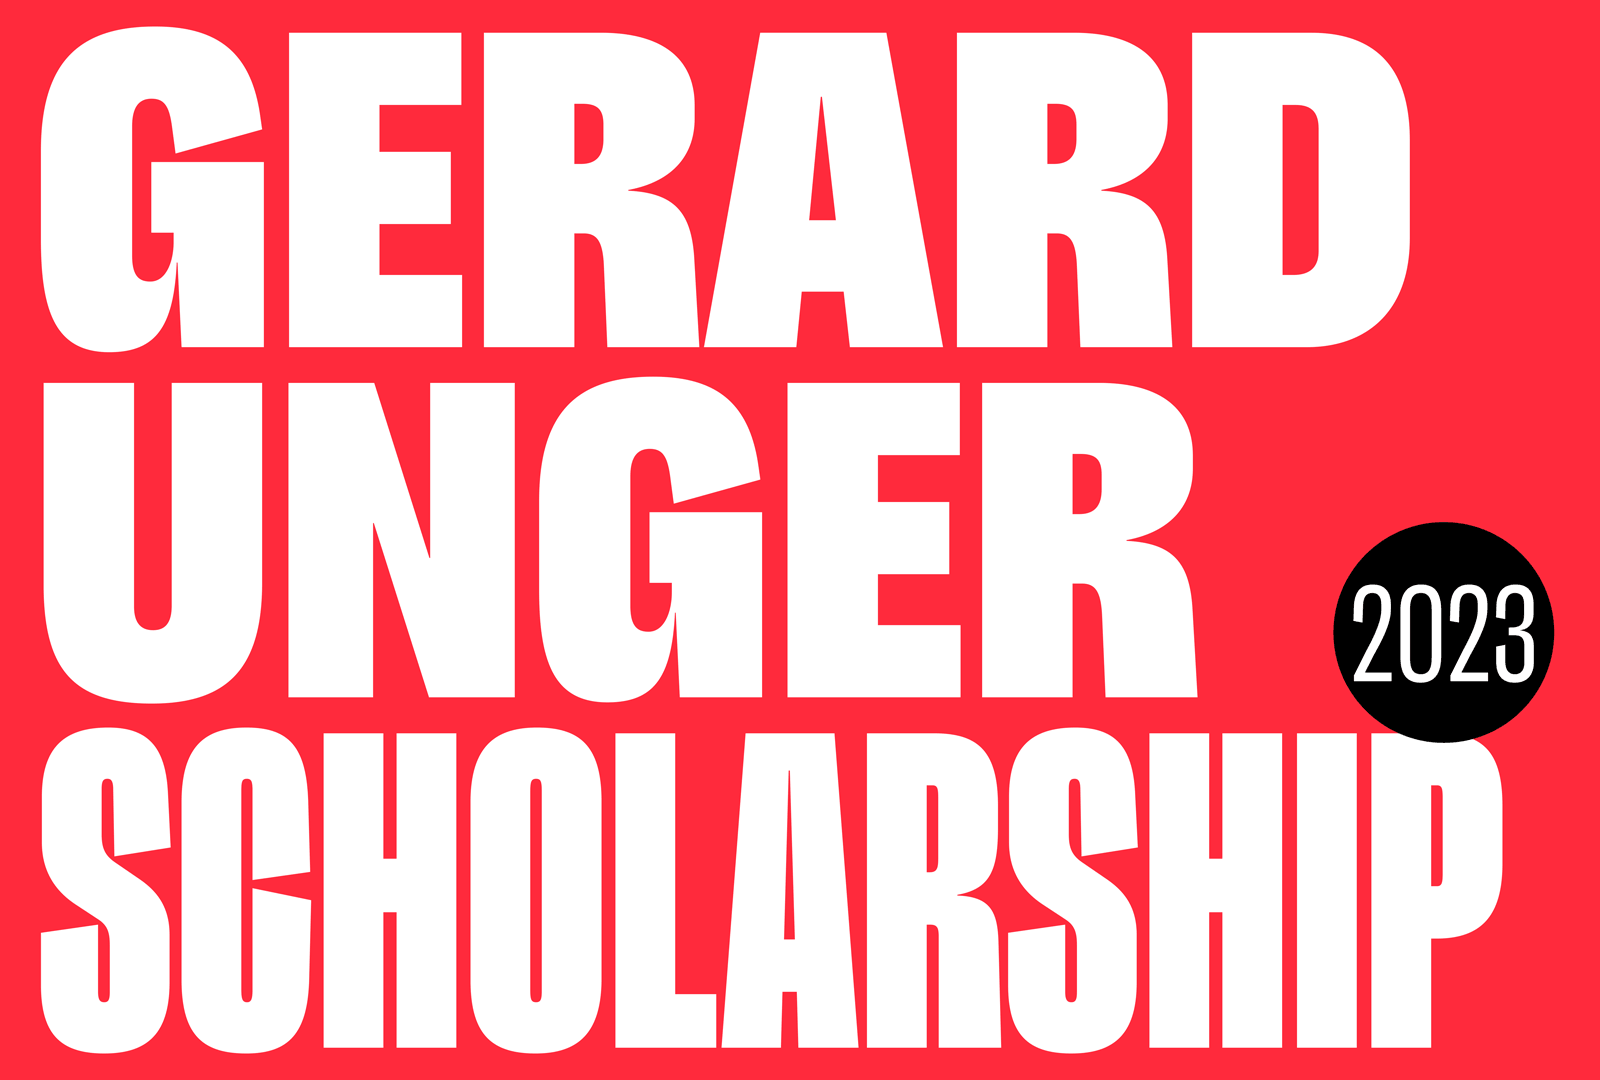 More information about "Gerard Unger Scholarship 2023"